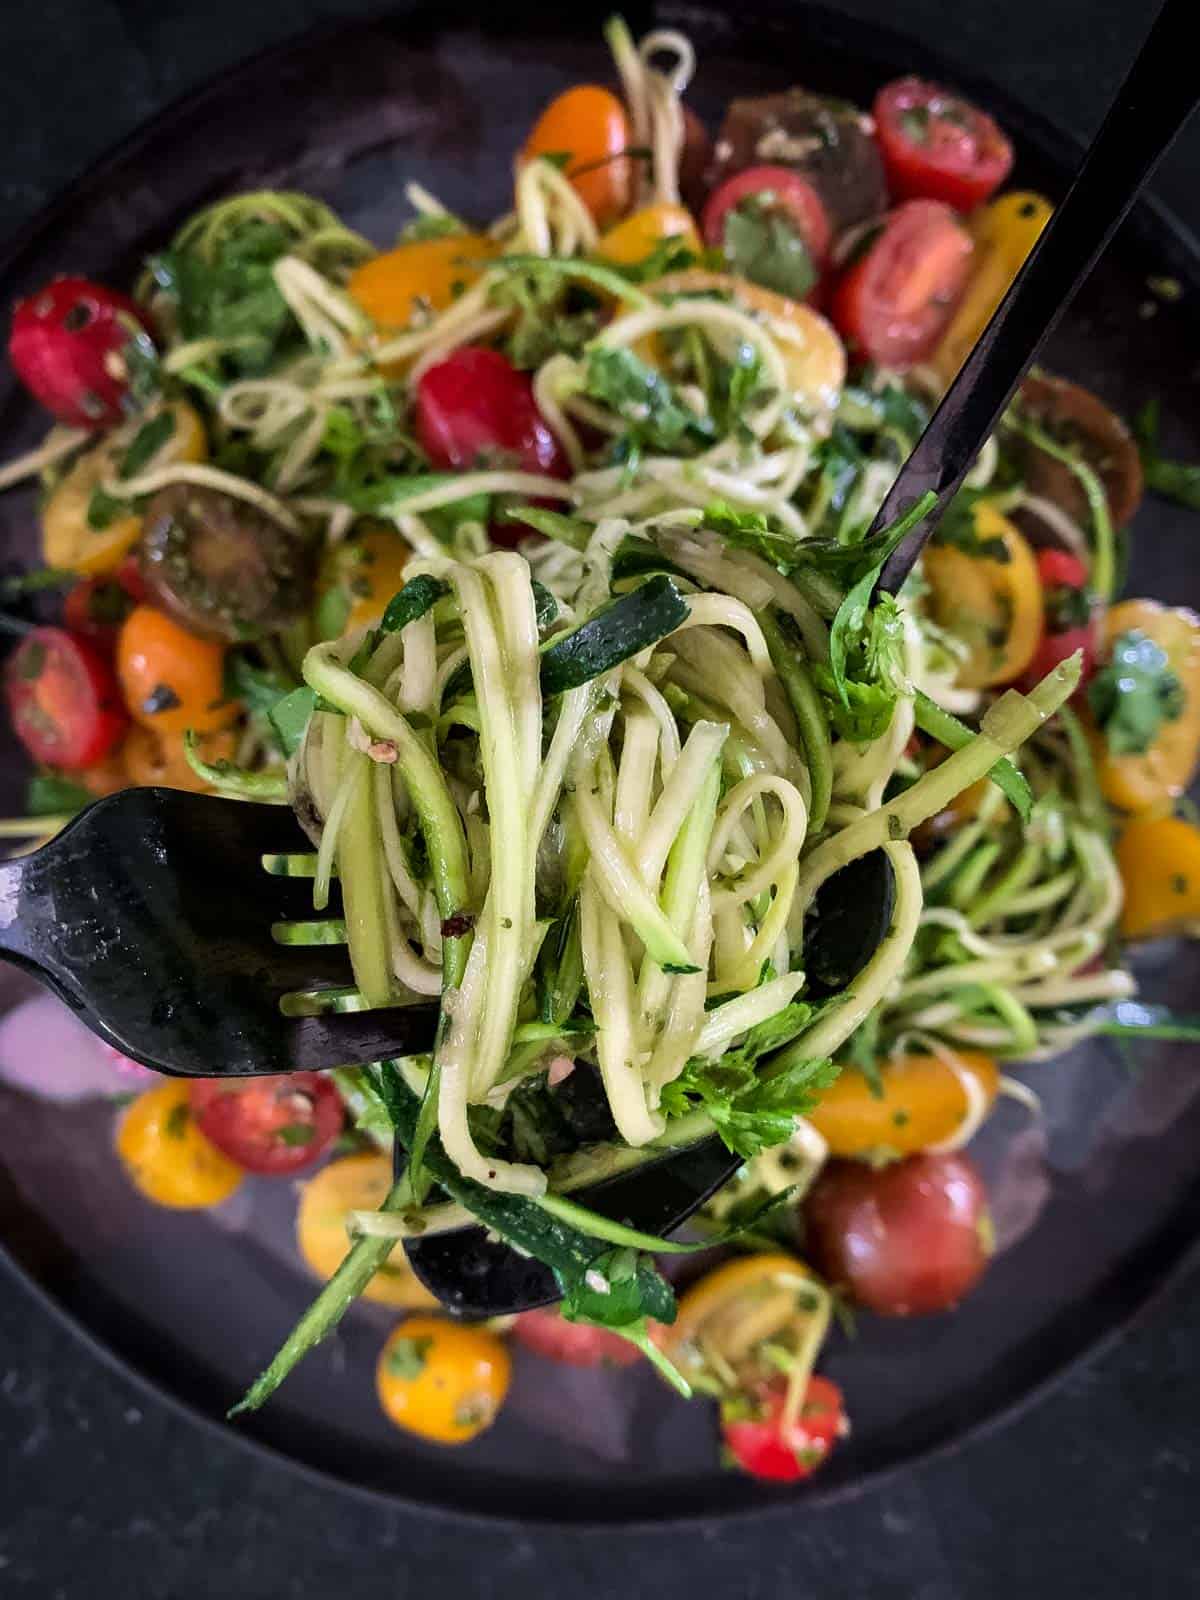 2 forks lifting a serve of Vegan Zucchini Noodle Salad with Pesto from the plate